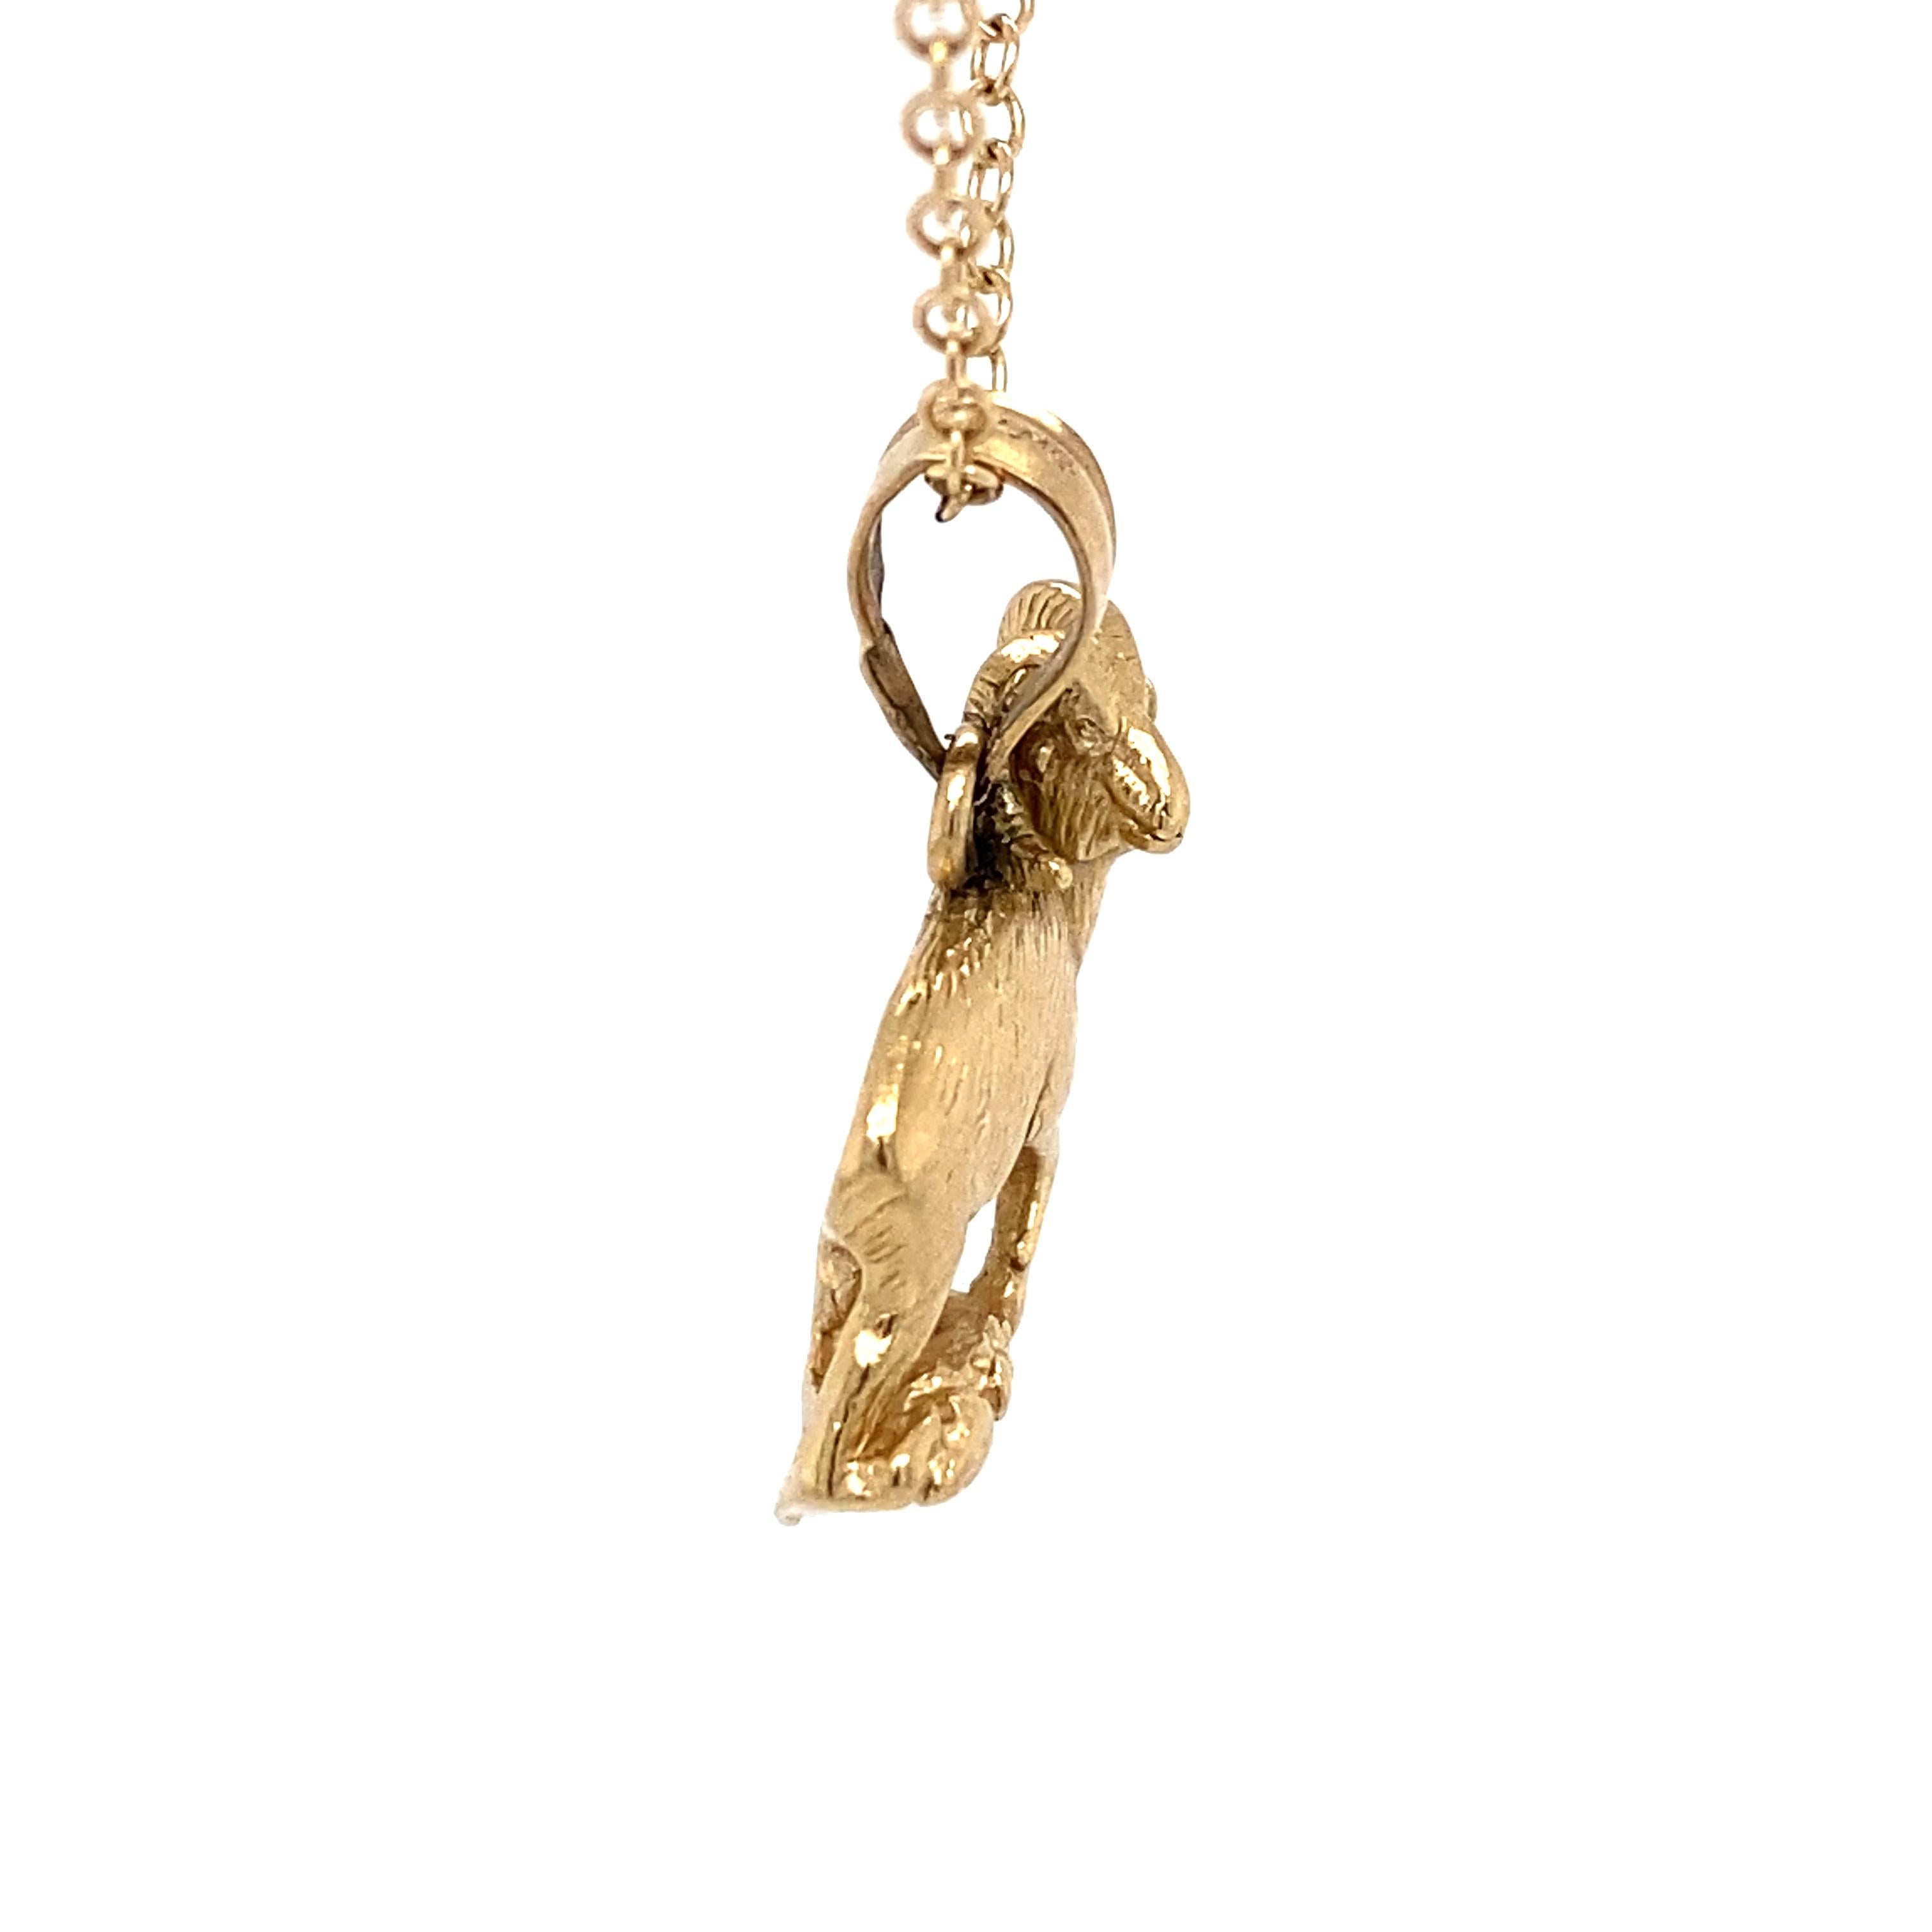 Chain not included.

Circa: 1950
Metal Type: 14 Karat Yellow Gold 
Weight: 4.2 grams
Dimensions: 1 Inch x 1 Inch